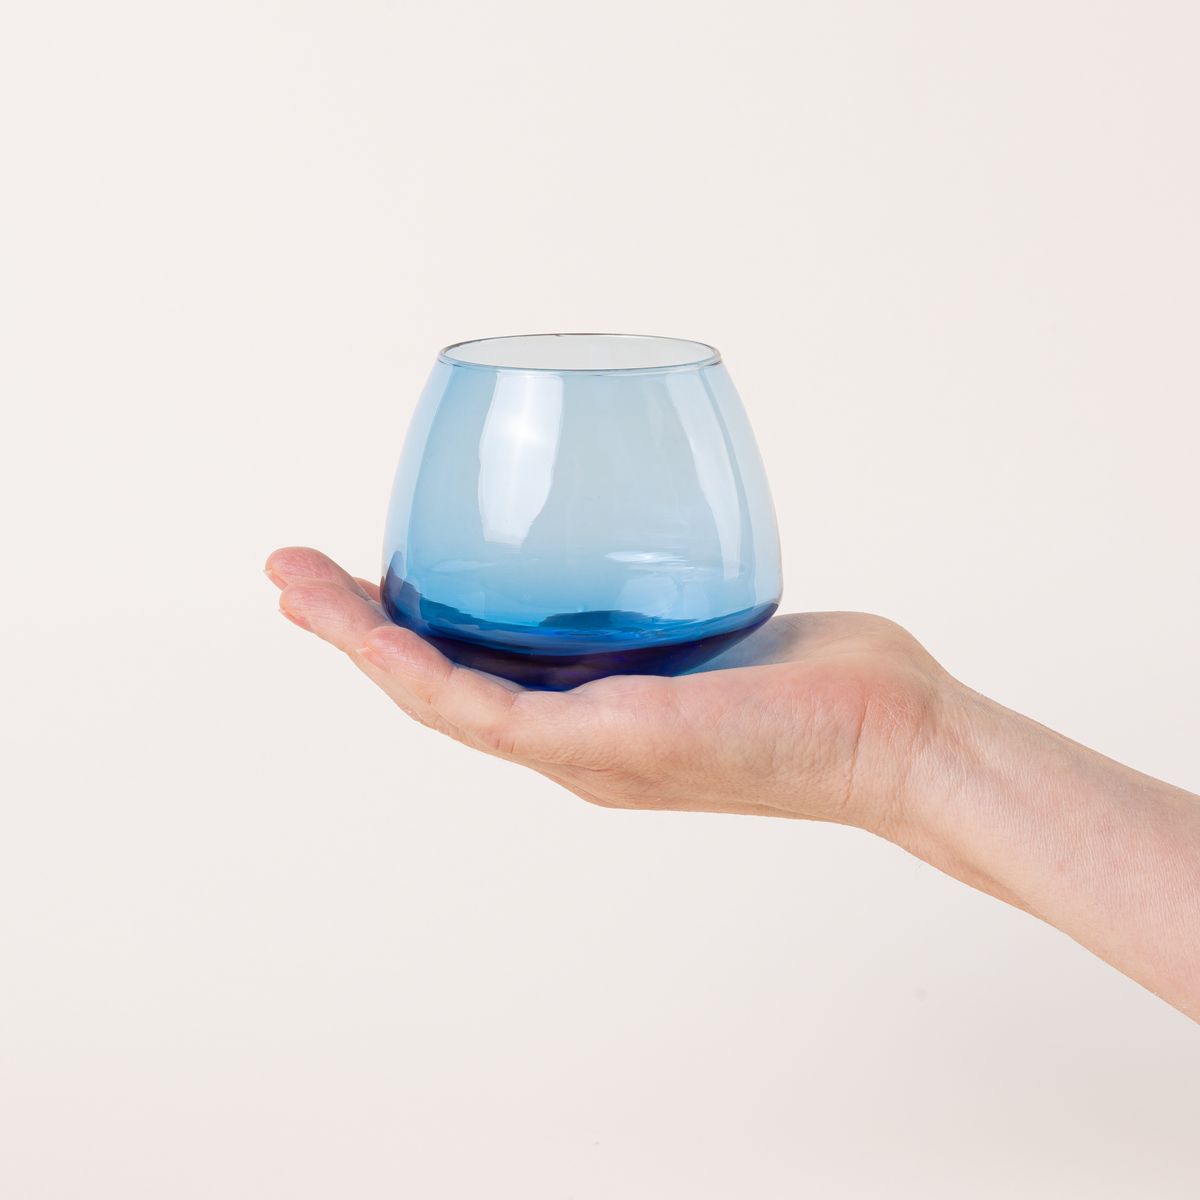 A hand holds a light blue glass whiskey snifter with a rounded base